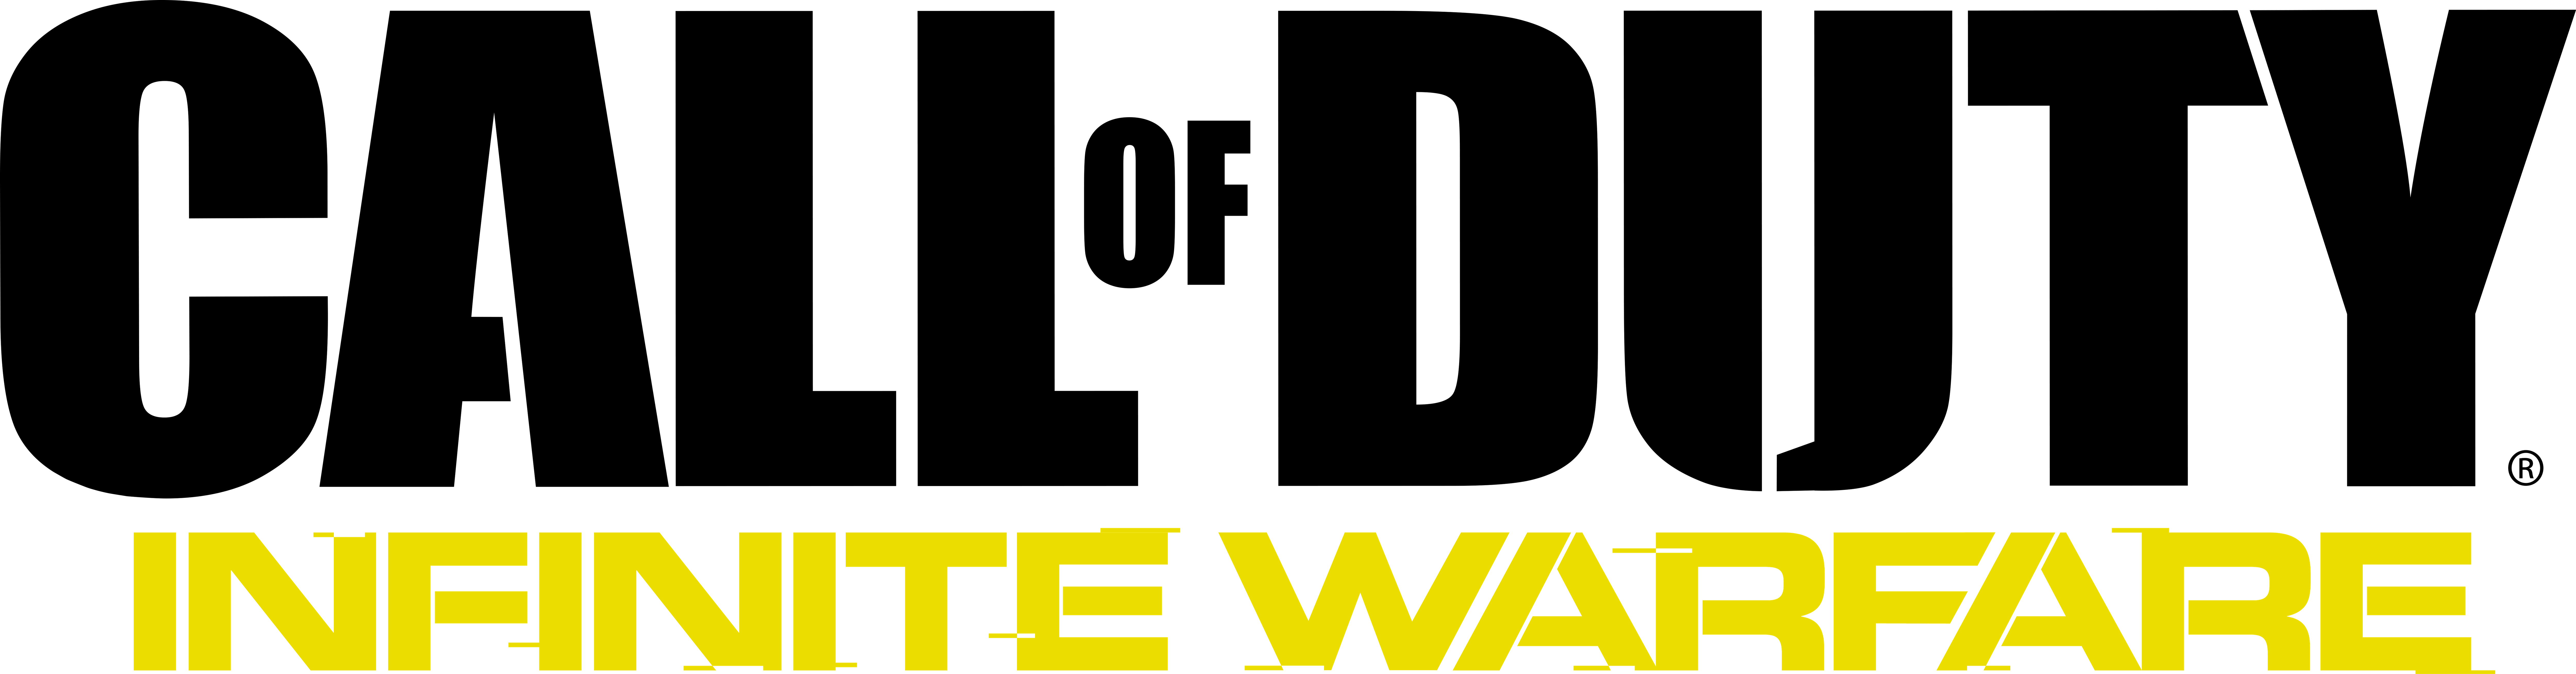 A Yellow Text On A Black Background